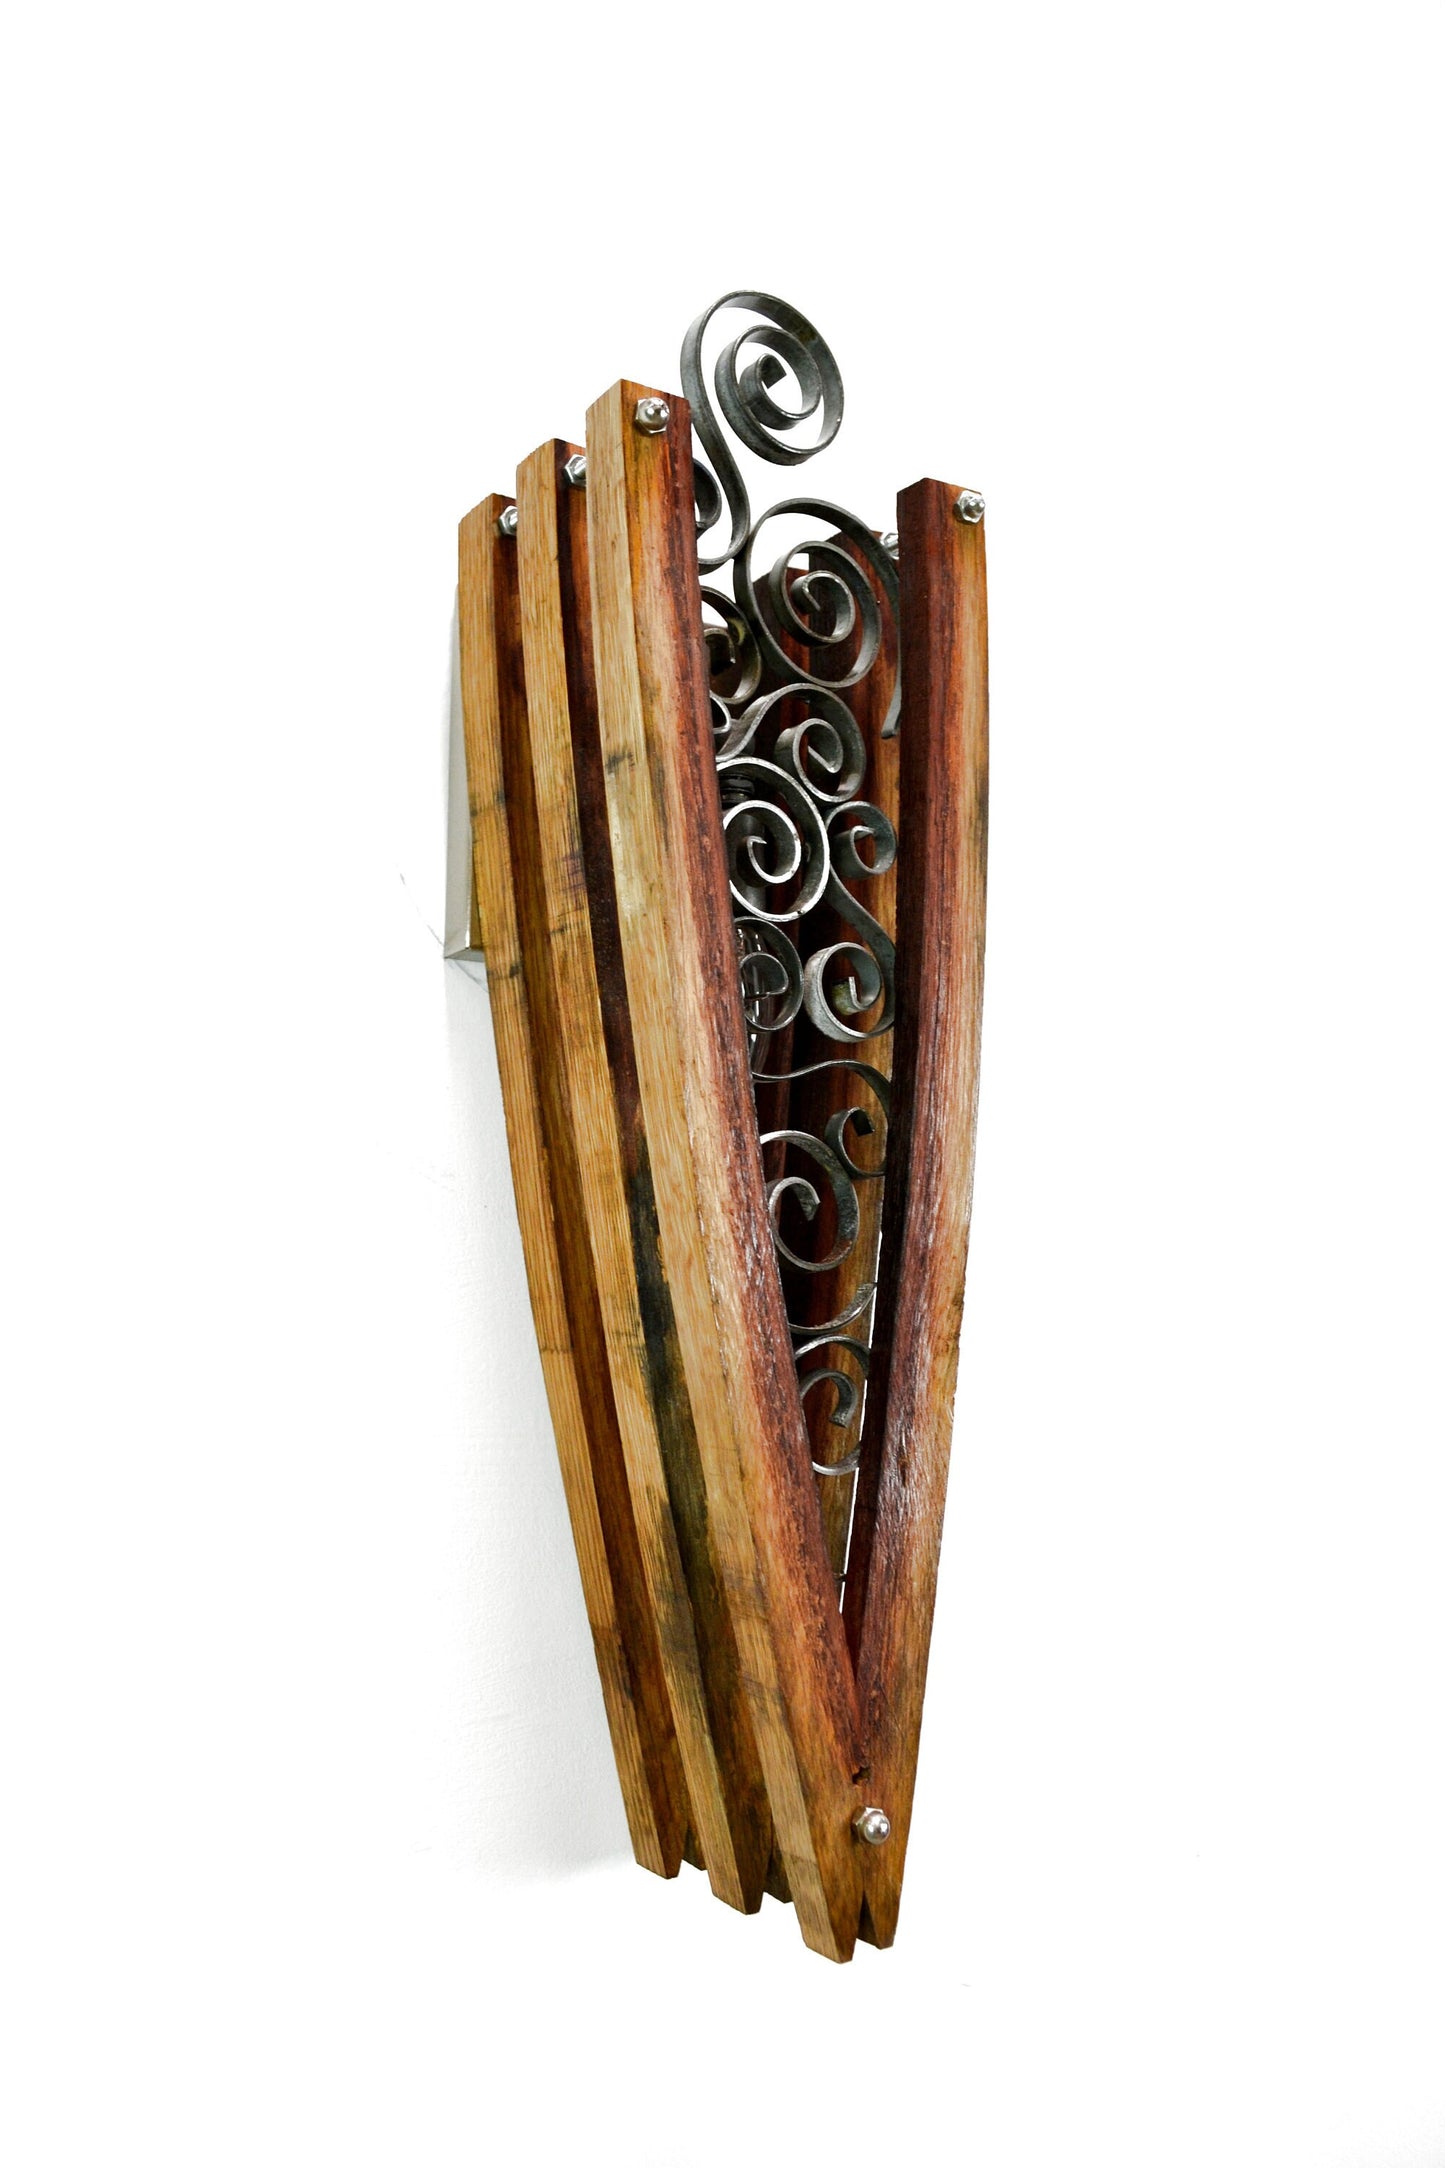 Wine Barrel Wall Sconce - Kirimito - Made from retired California wine barrels 100% Recycled!